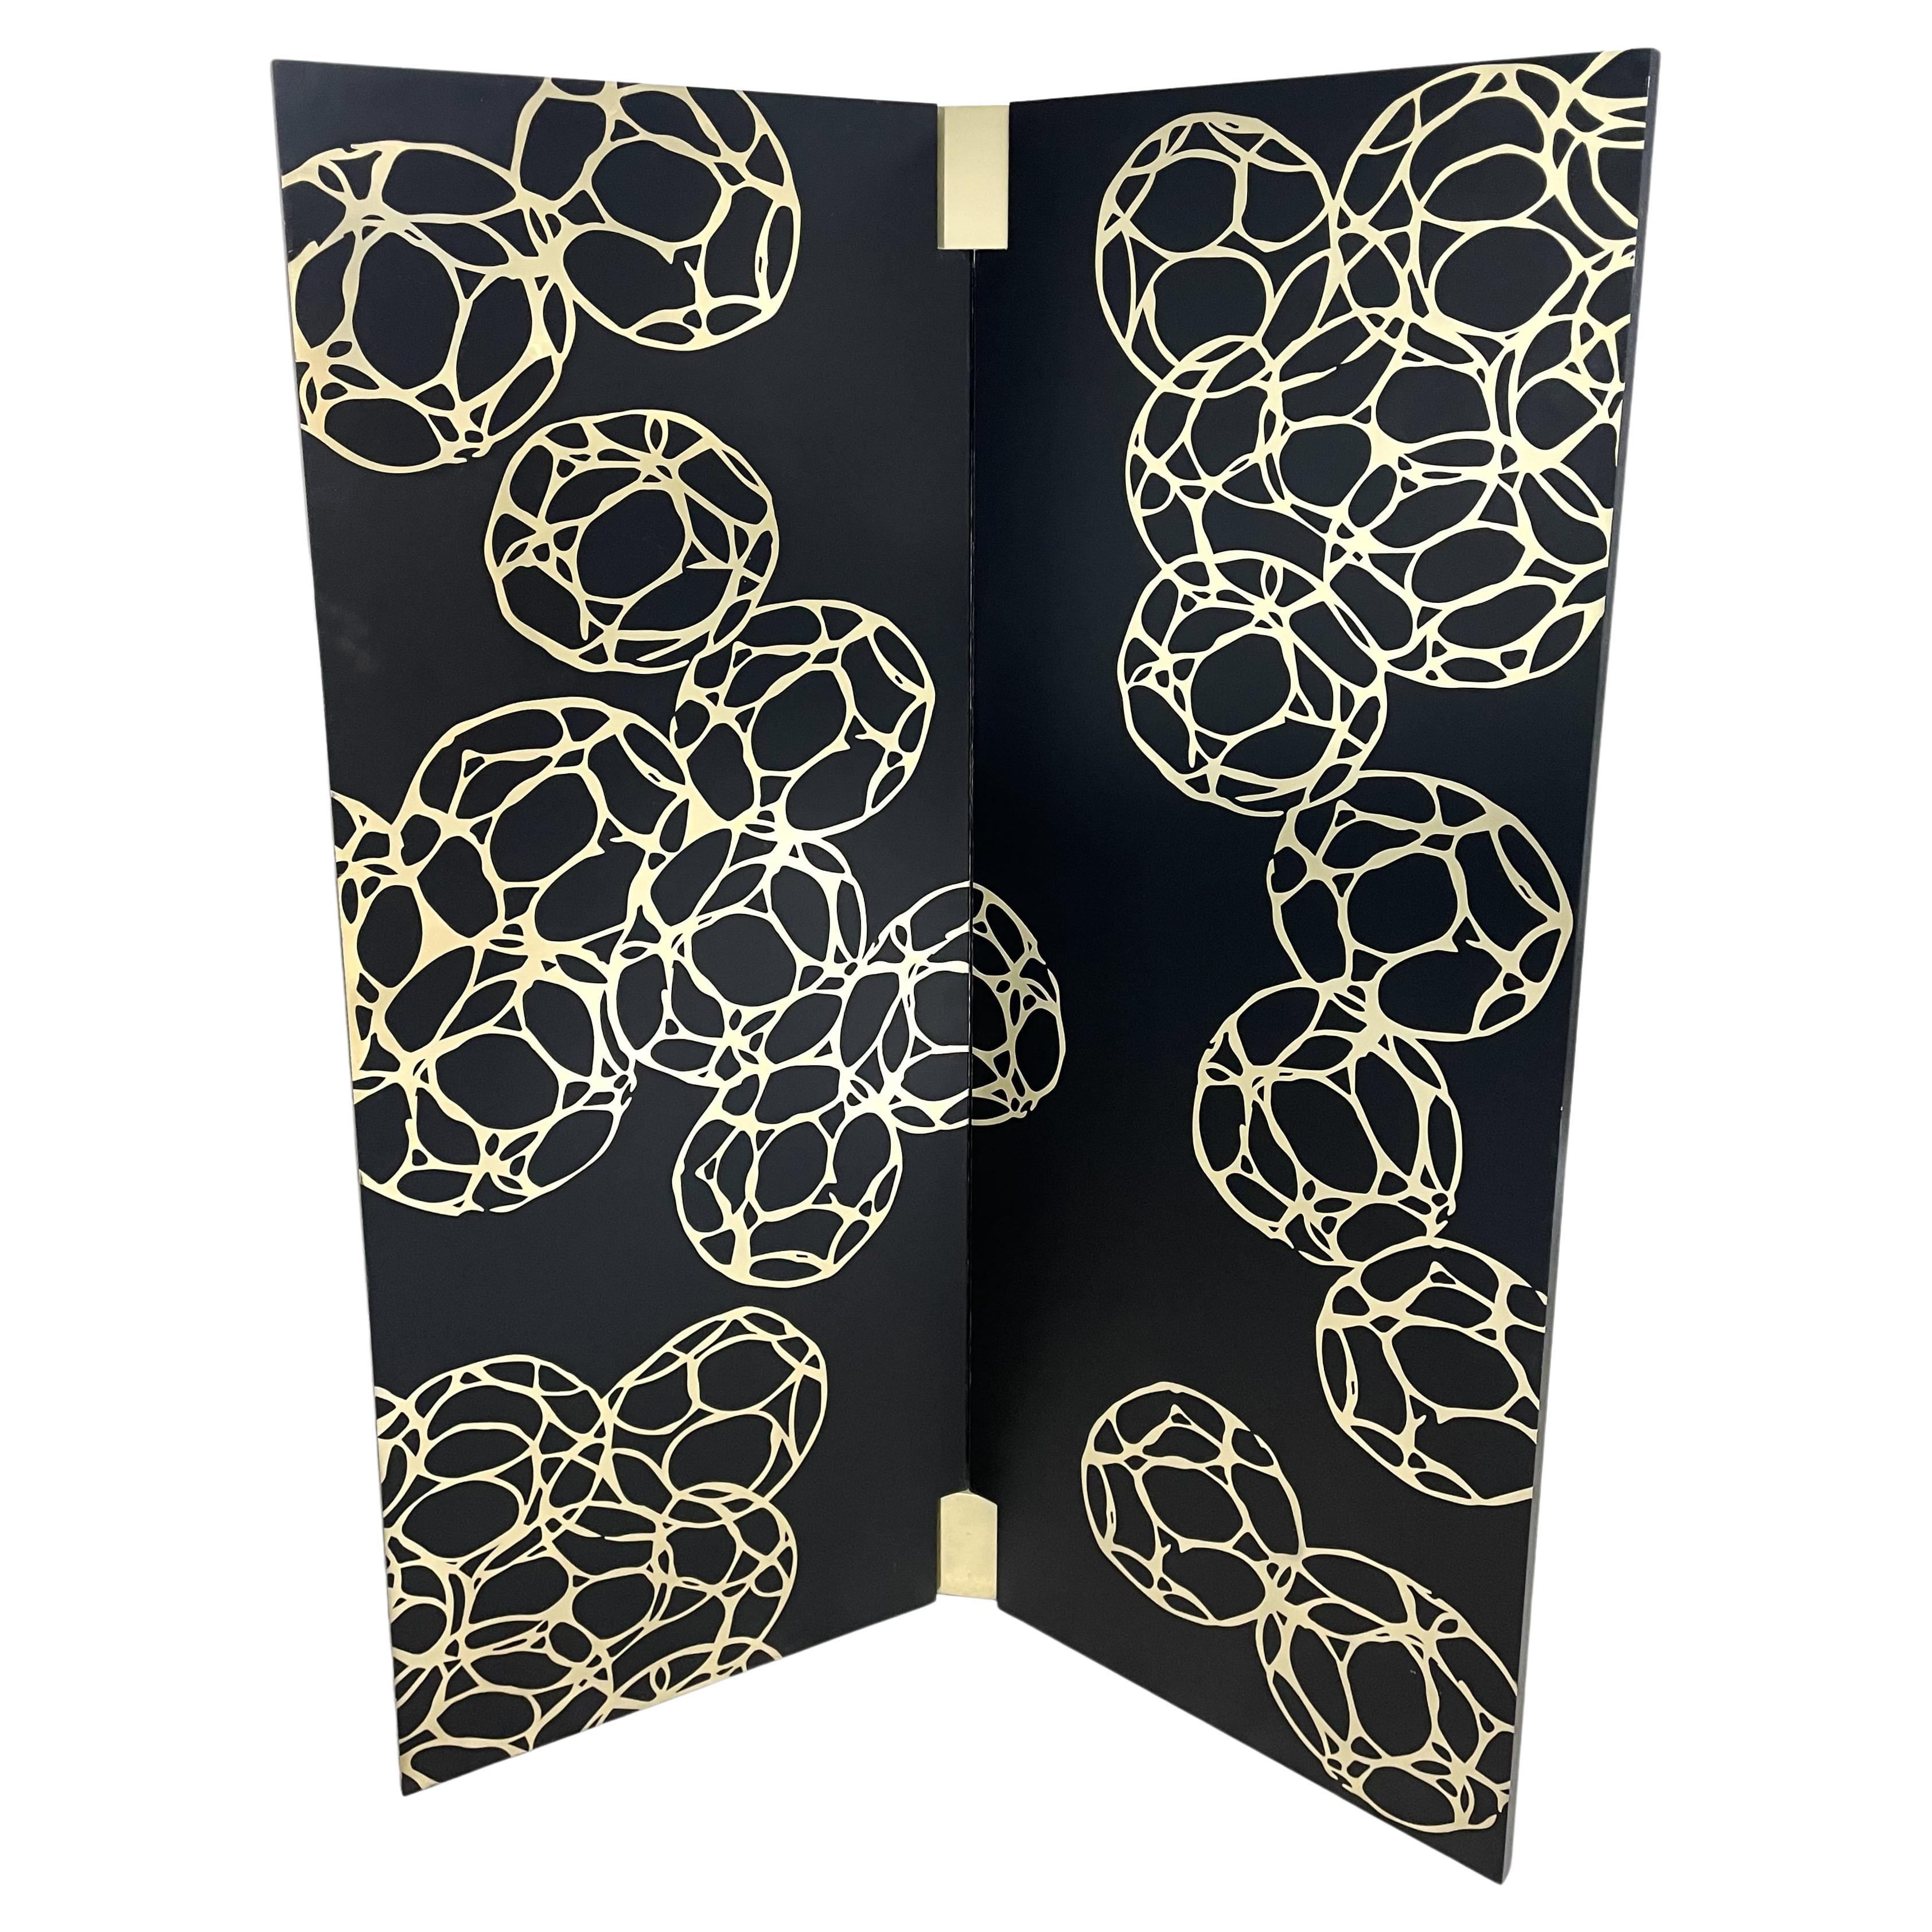 Two-Panel Lacquer and Titanium Screen by Frédérique Domergue, Limited Edition For Sale